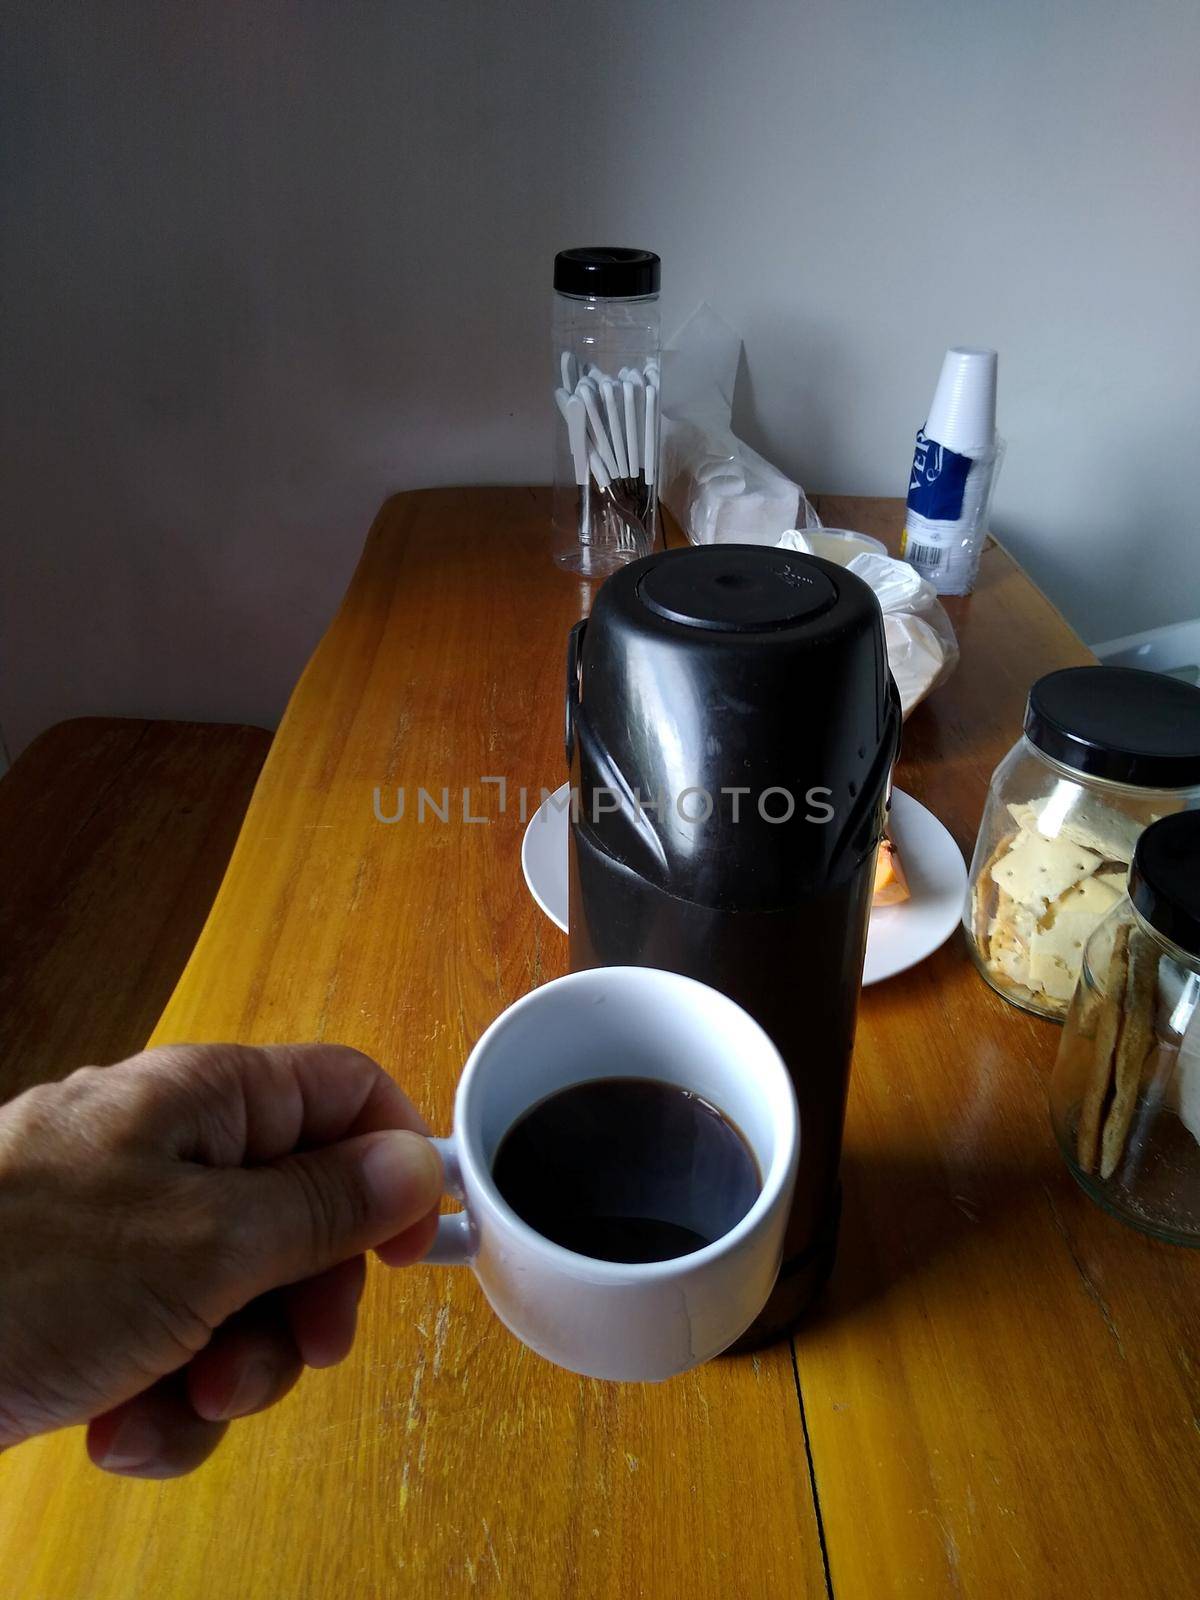 salvador, bahia / brazil - october 25, 2020: hand holds a cup of coffee next to a thermos on a breakfast table in the city of Salvador.
